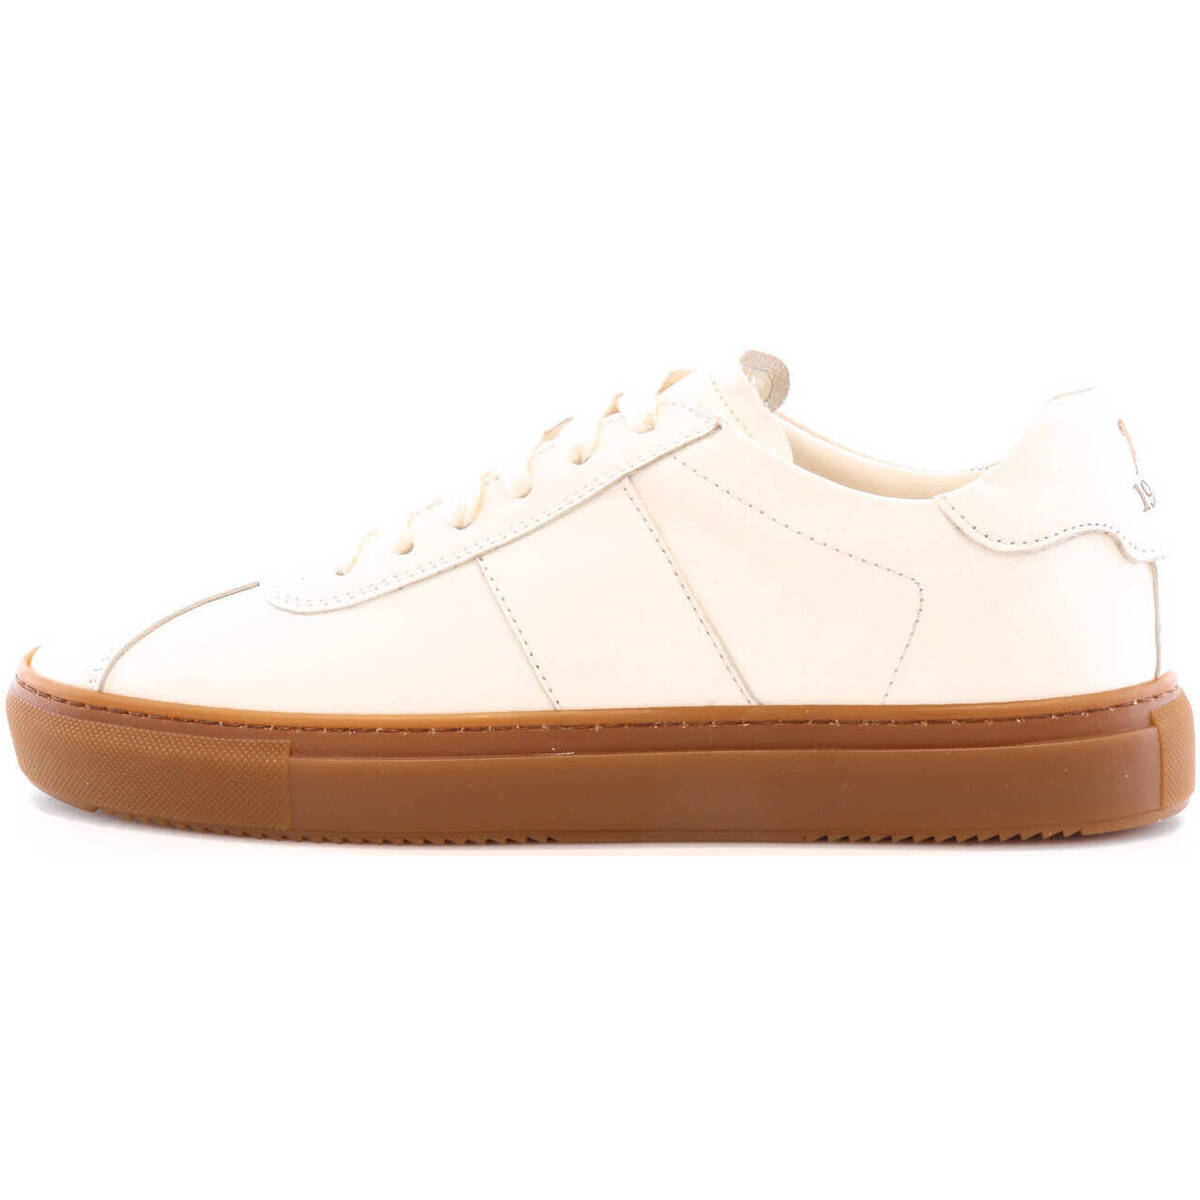 Chaussures Homme Baskets montantes Mark Midor S08-4779 Blanc